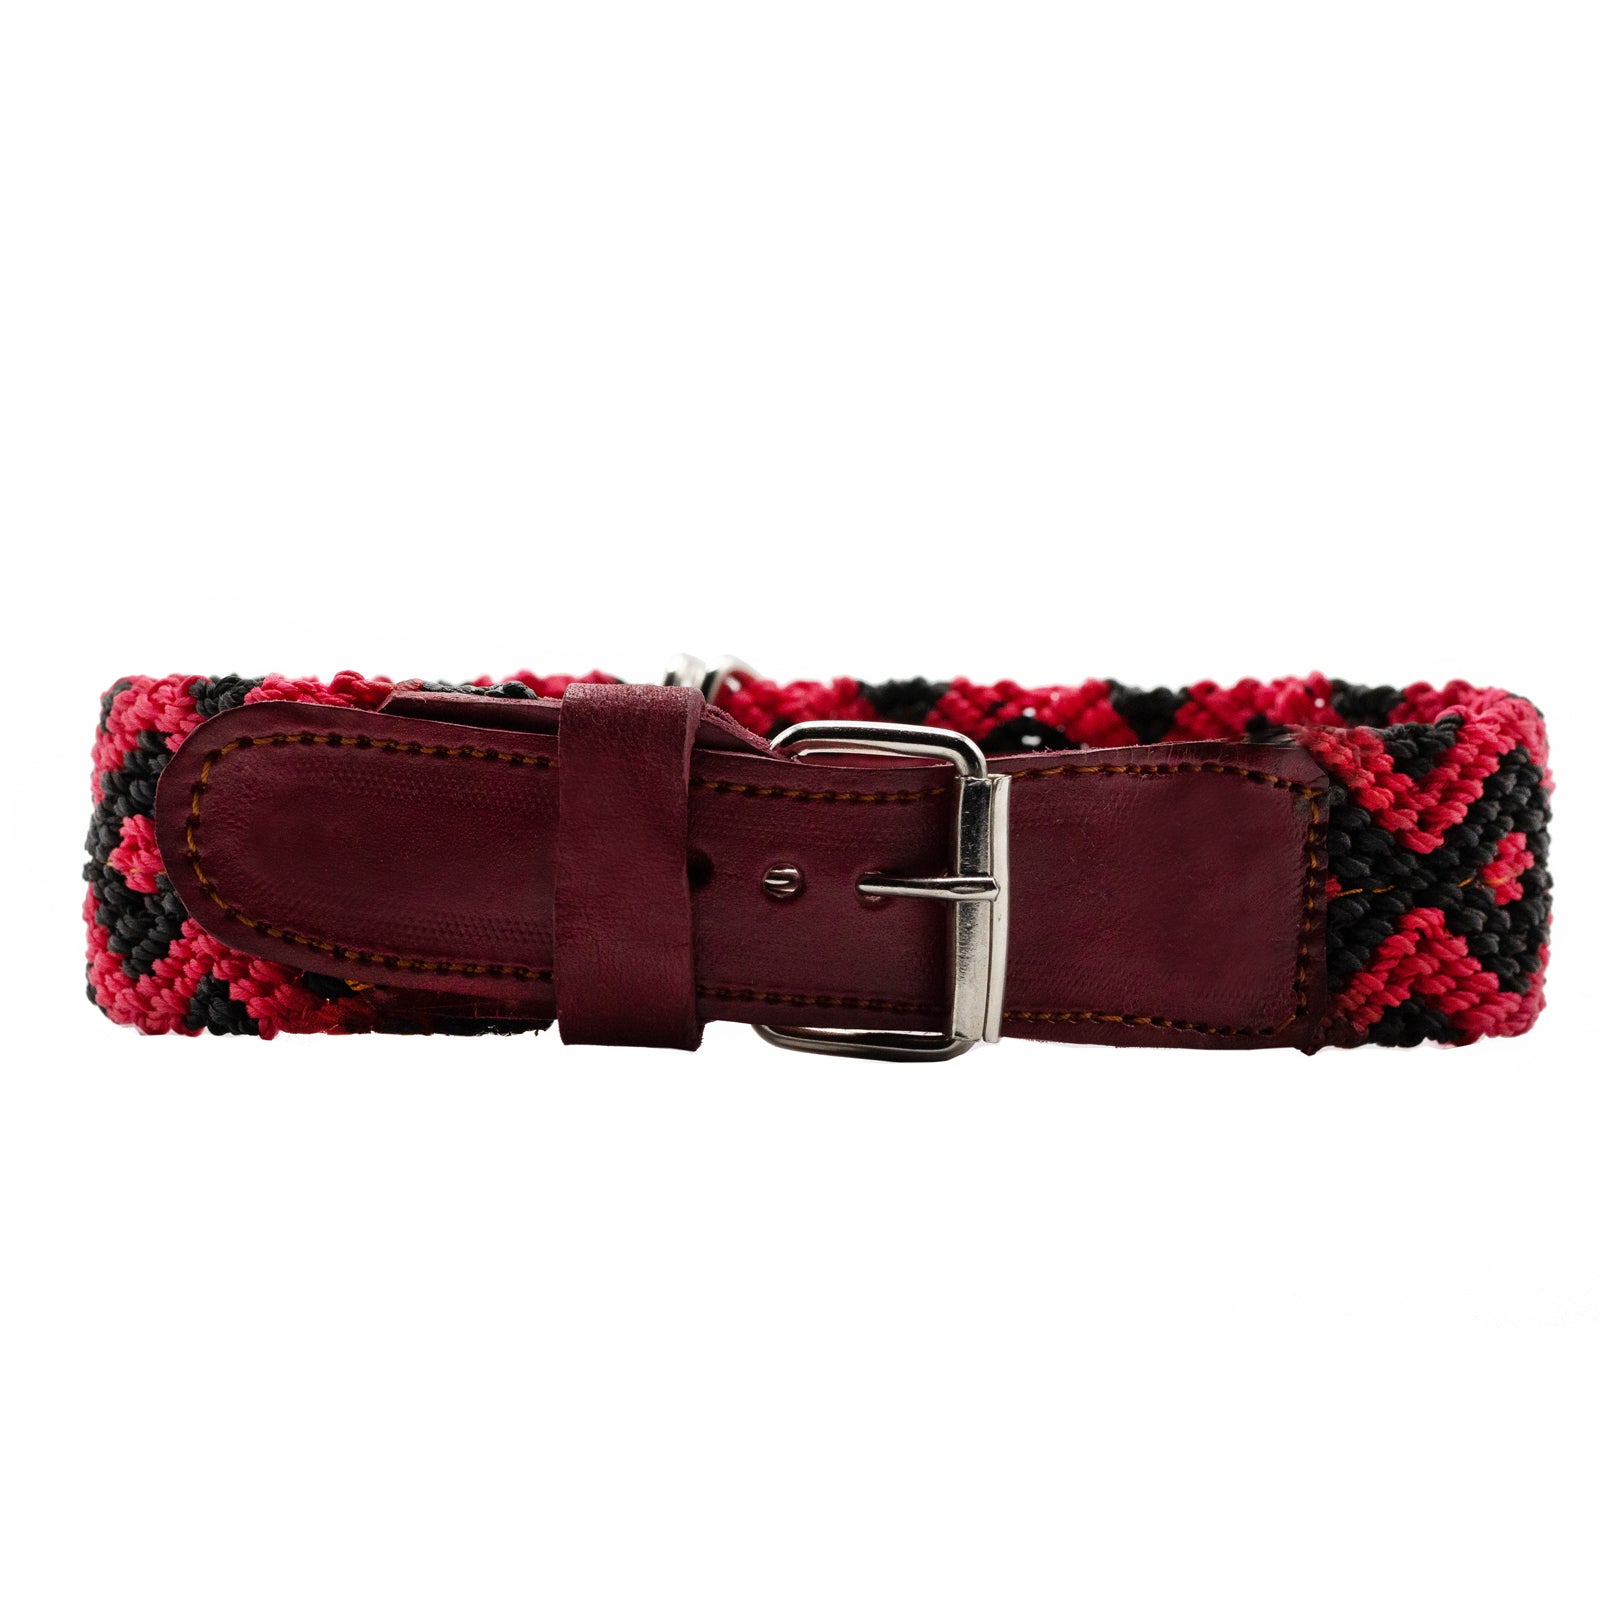 Handwoven dog collar with a touch of elegance